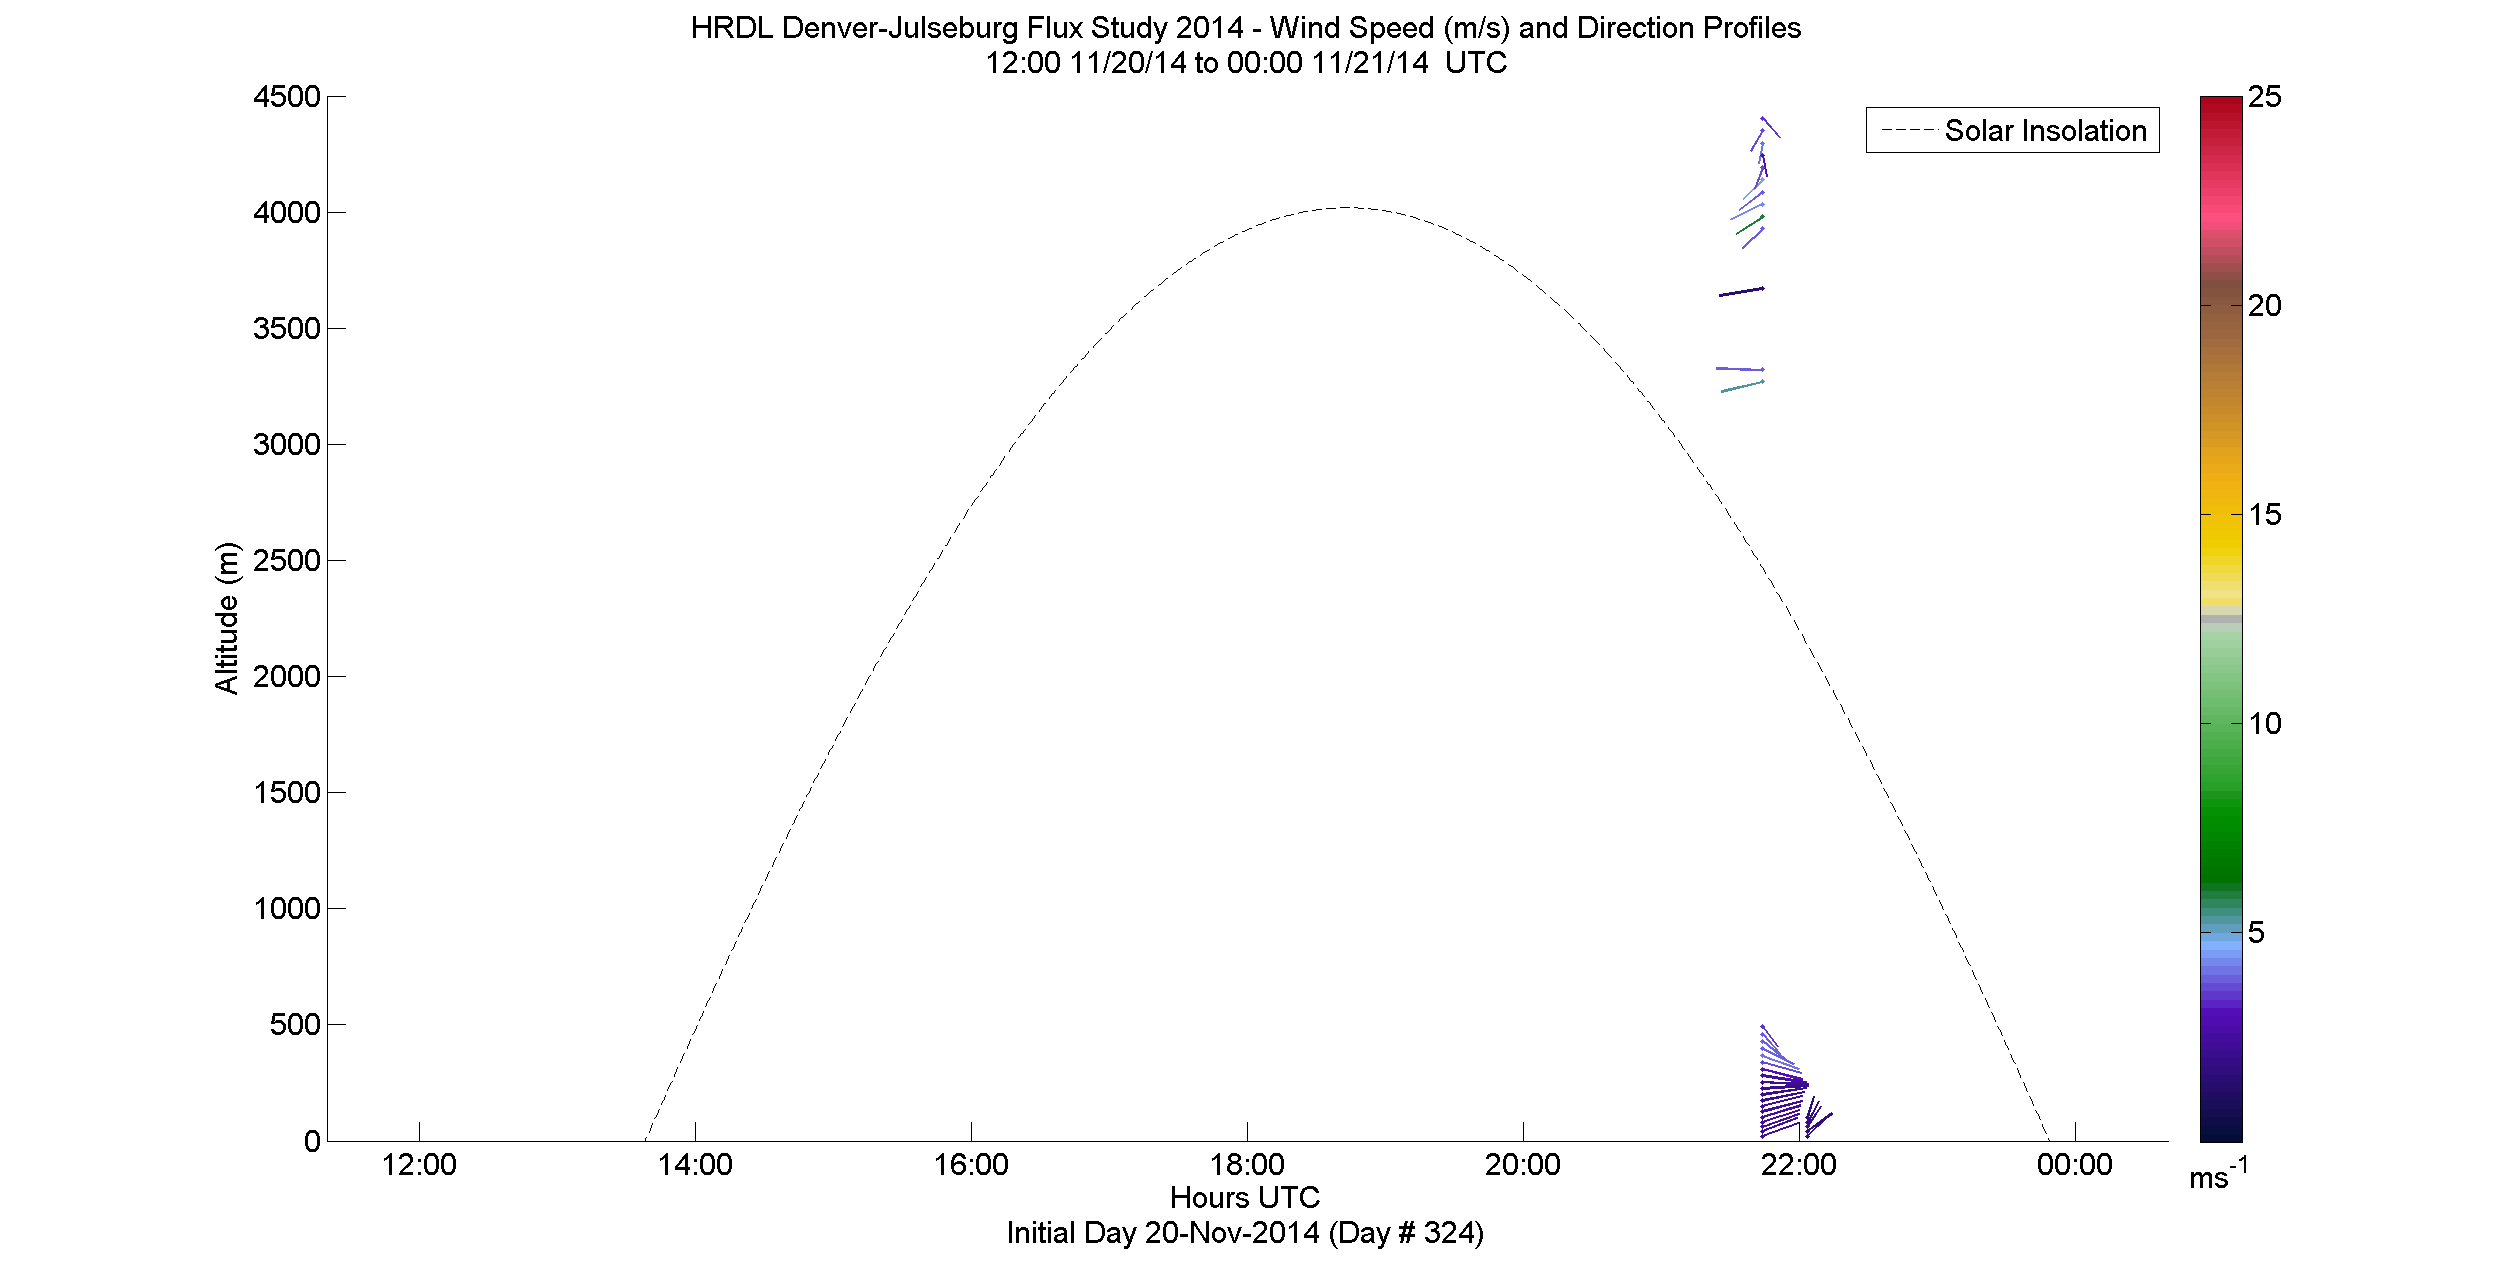 HRDL speed and direction profile - November 20 pm